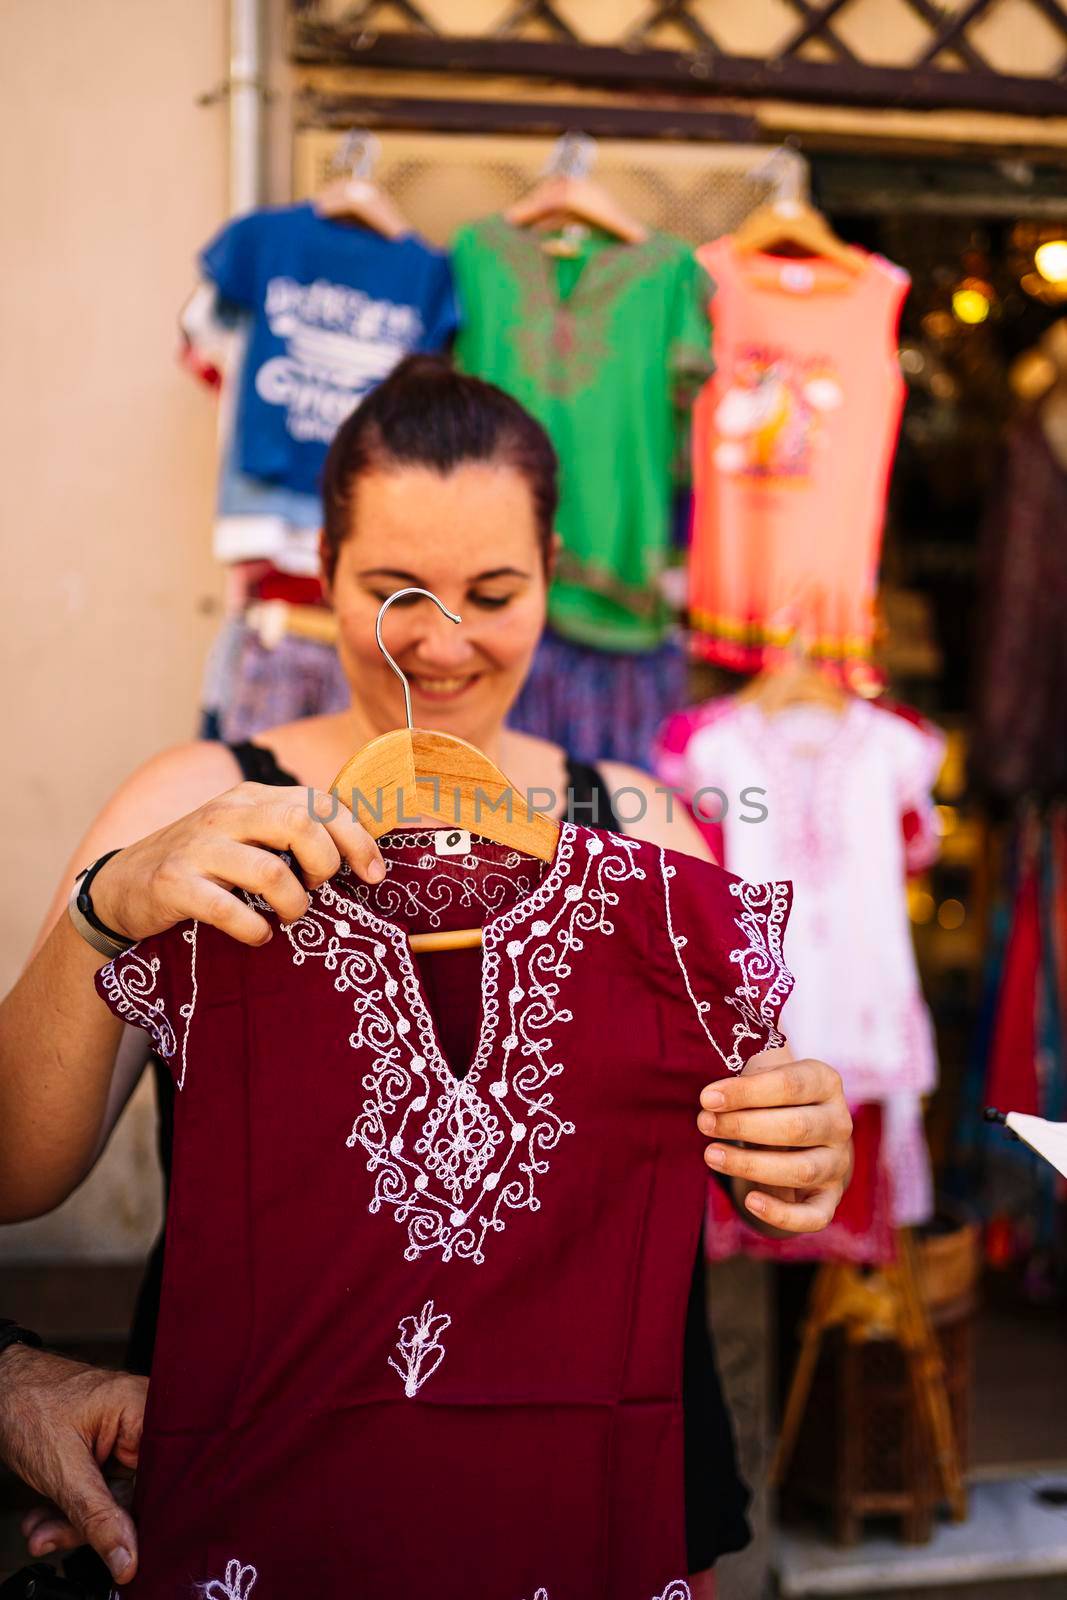 A young woman showing clothes in a street market. Stock photography.